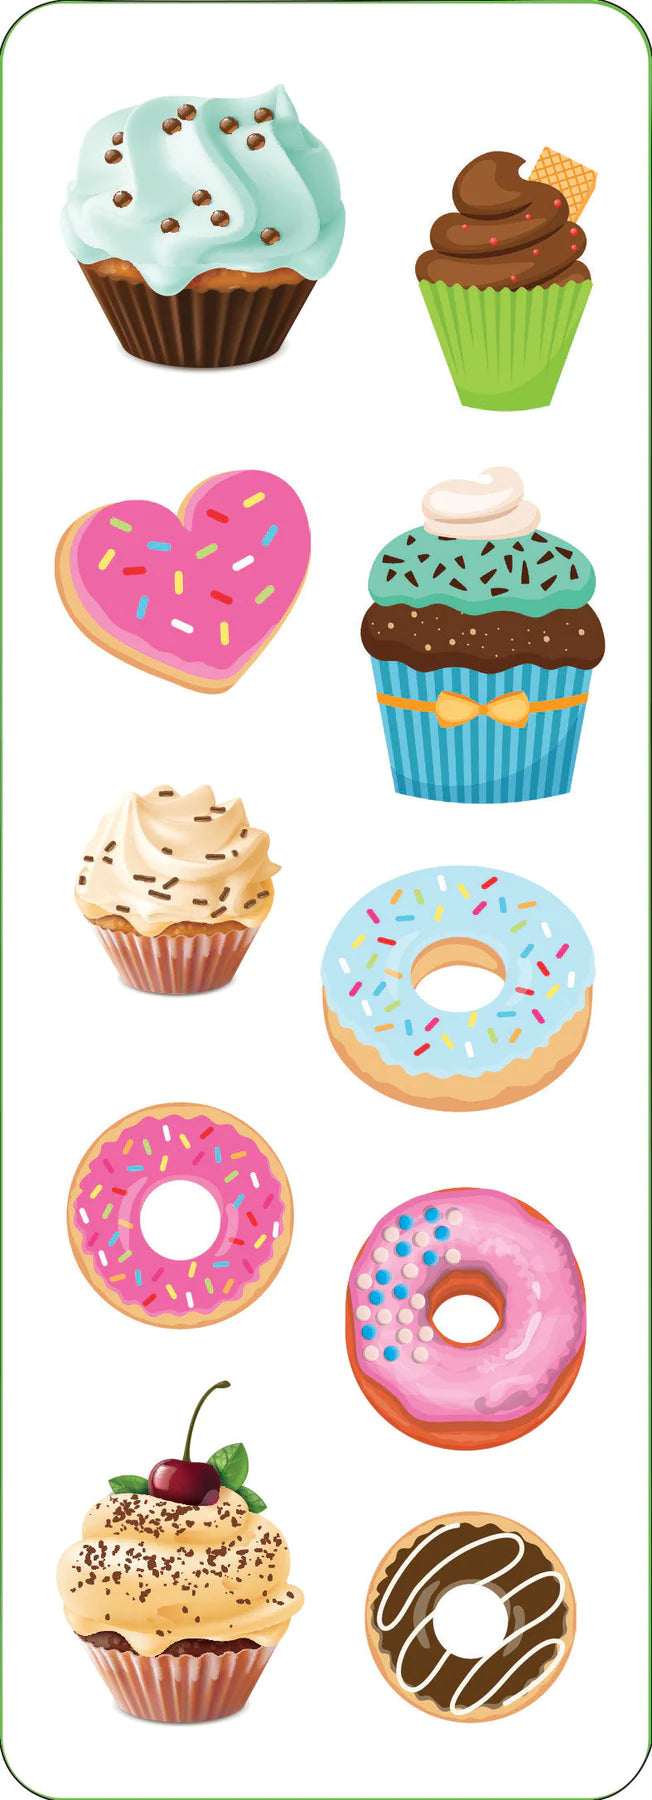 Cupcakes &amp; Donuts Stickers